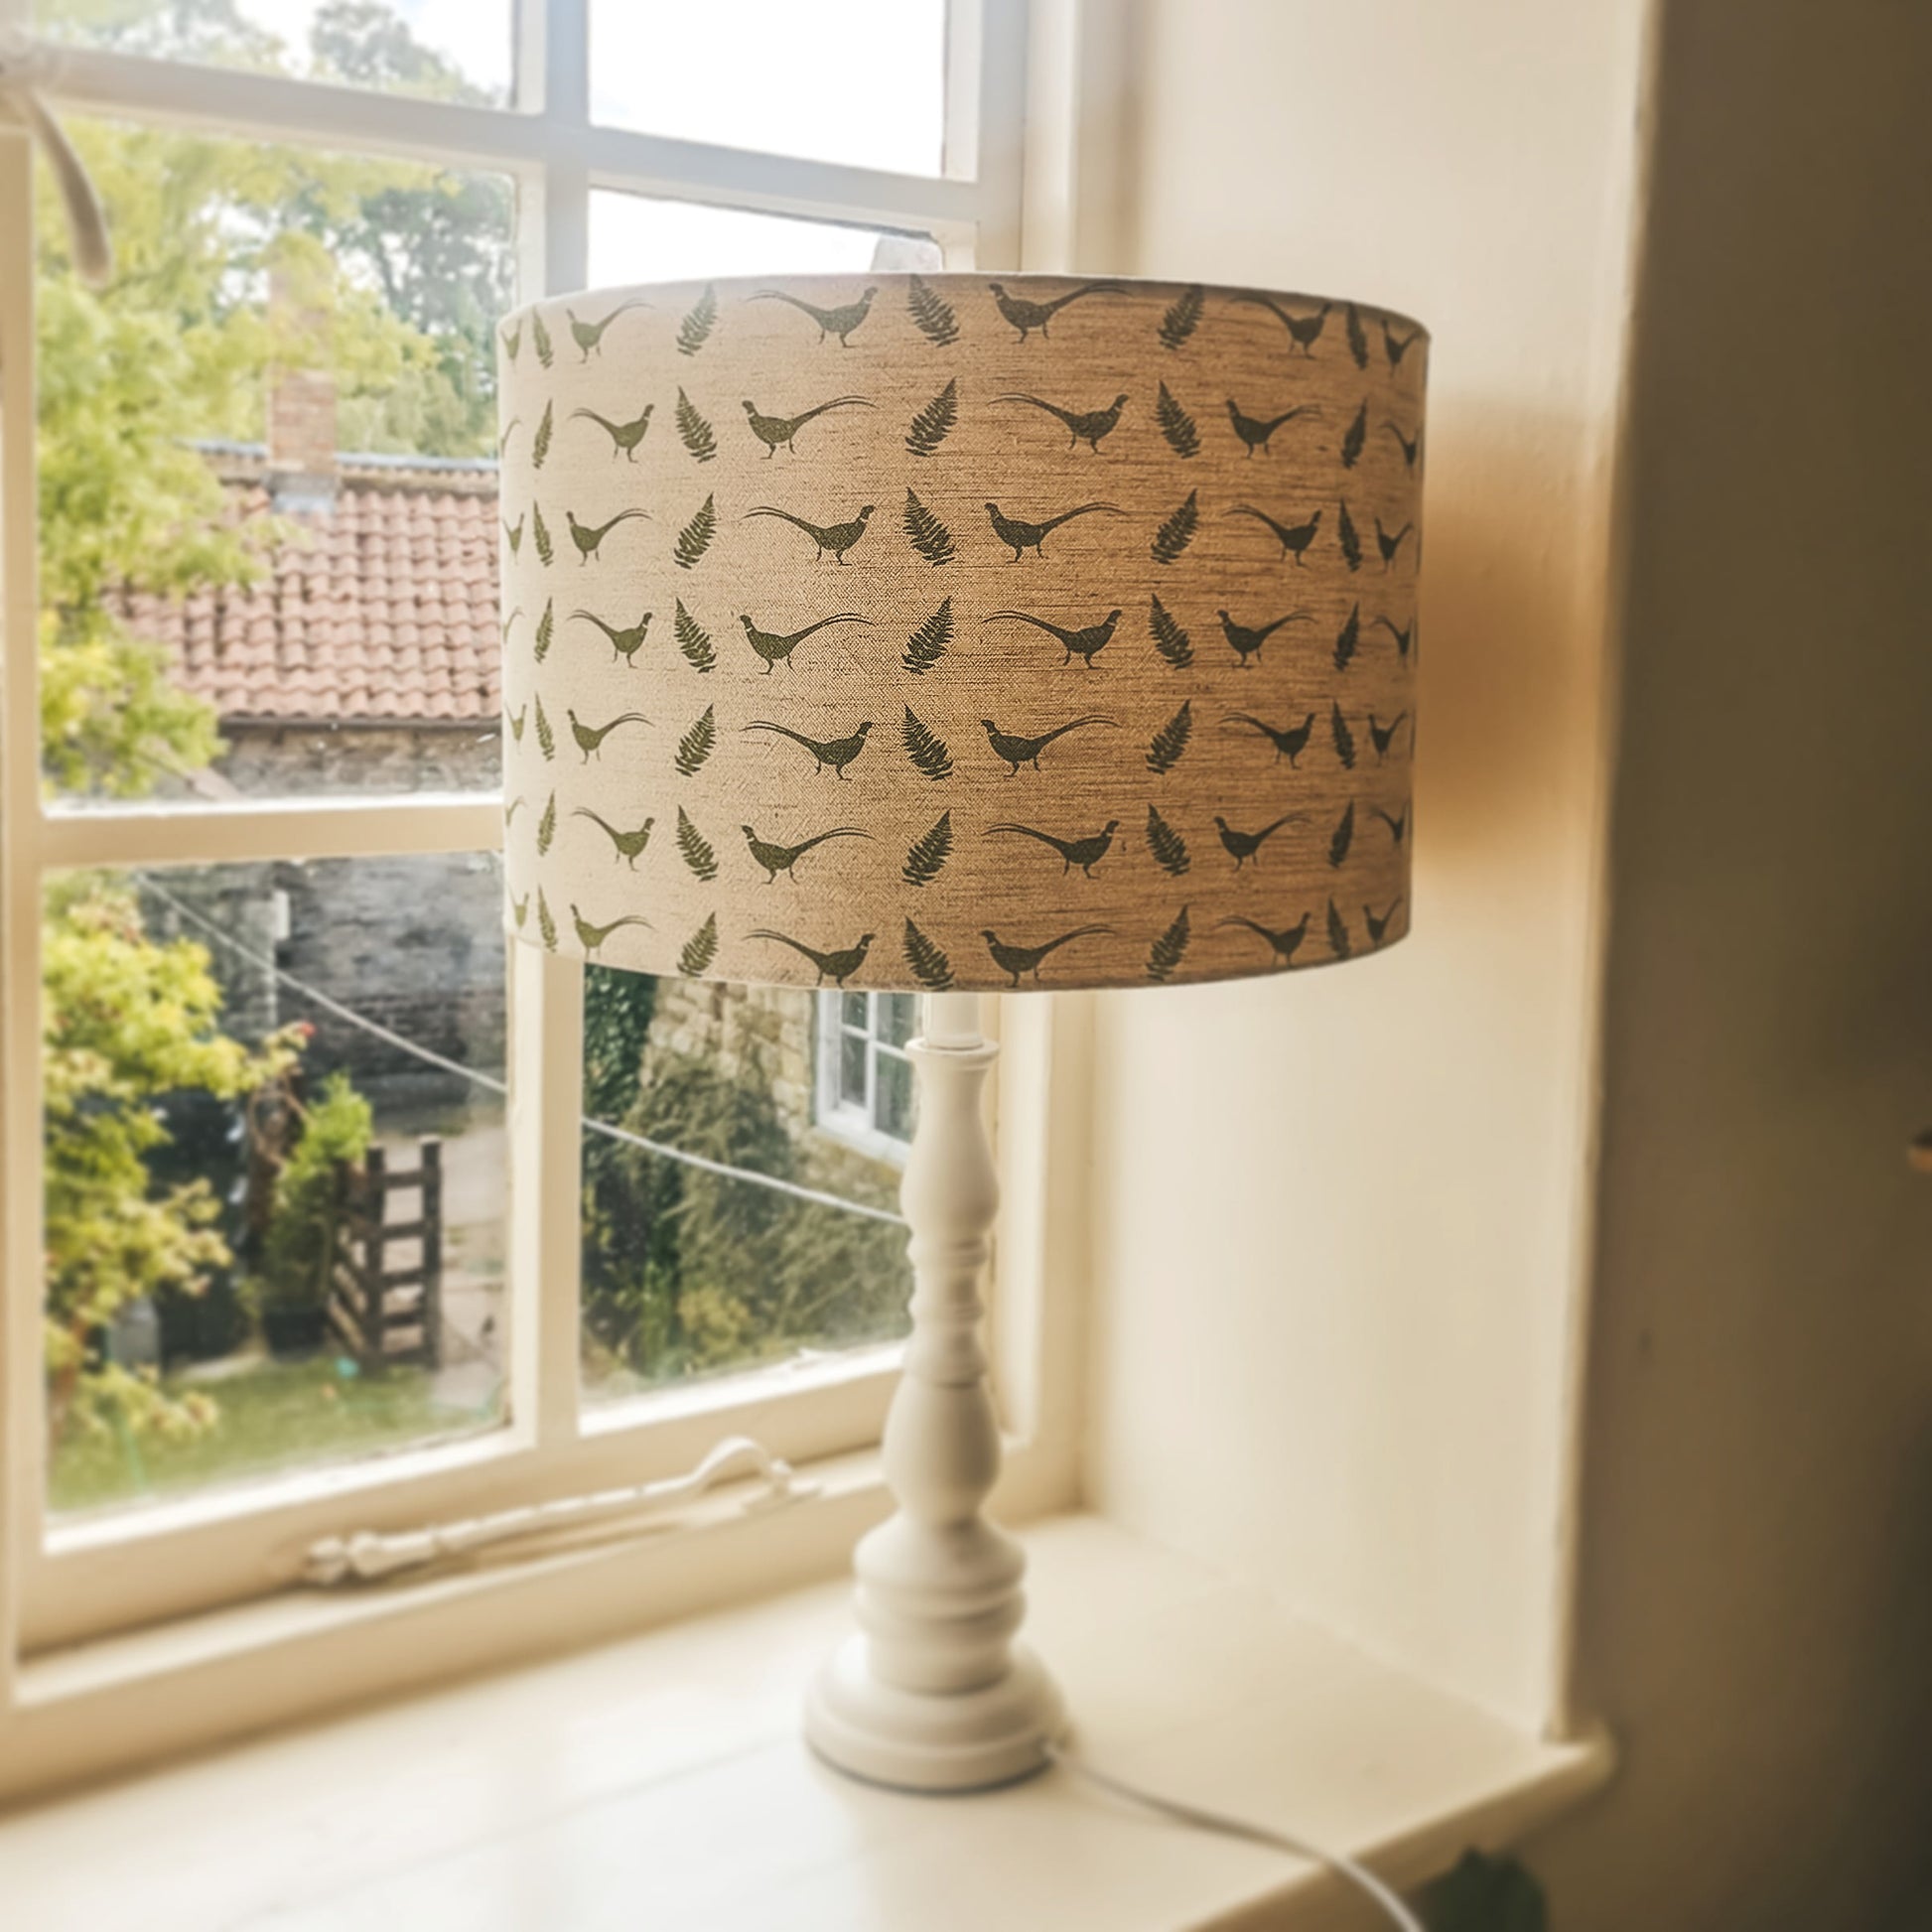 Pheasant Print Lampshade - Country Home Decor - Handmade by F&B - Pheasant & Fern Print F&B fabric available in green, blue, pink and grey